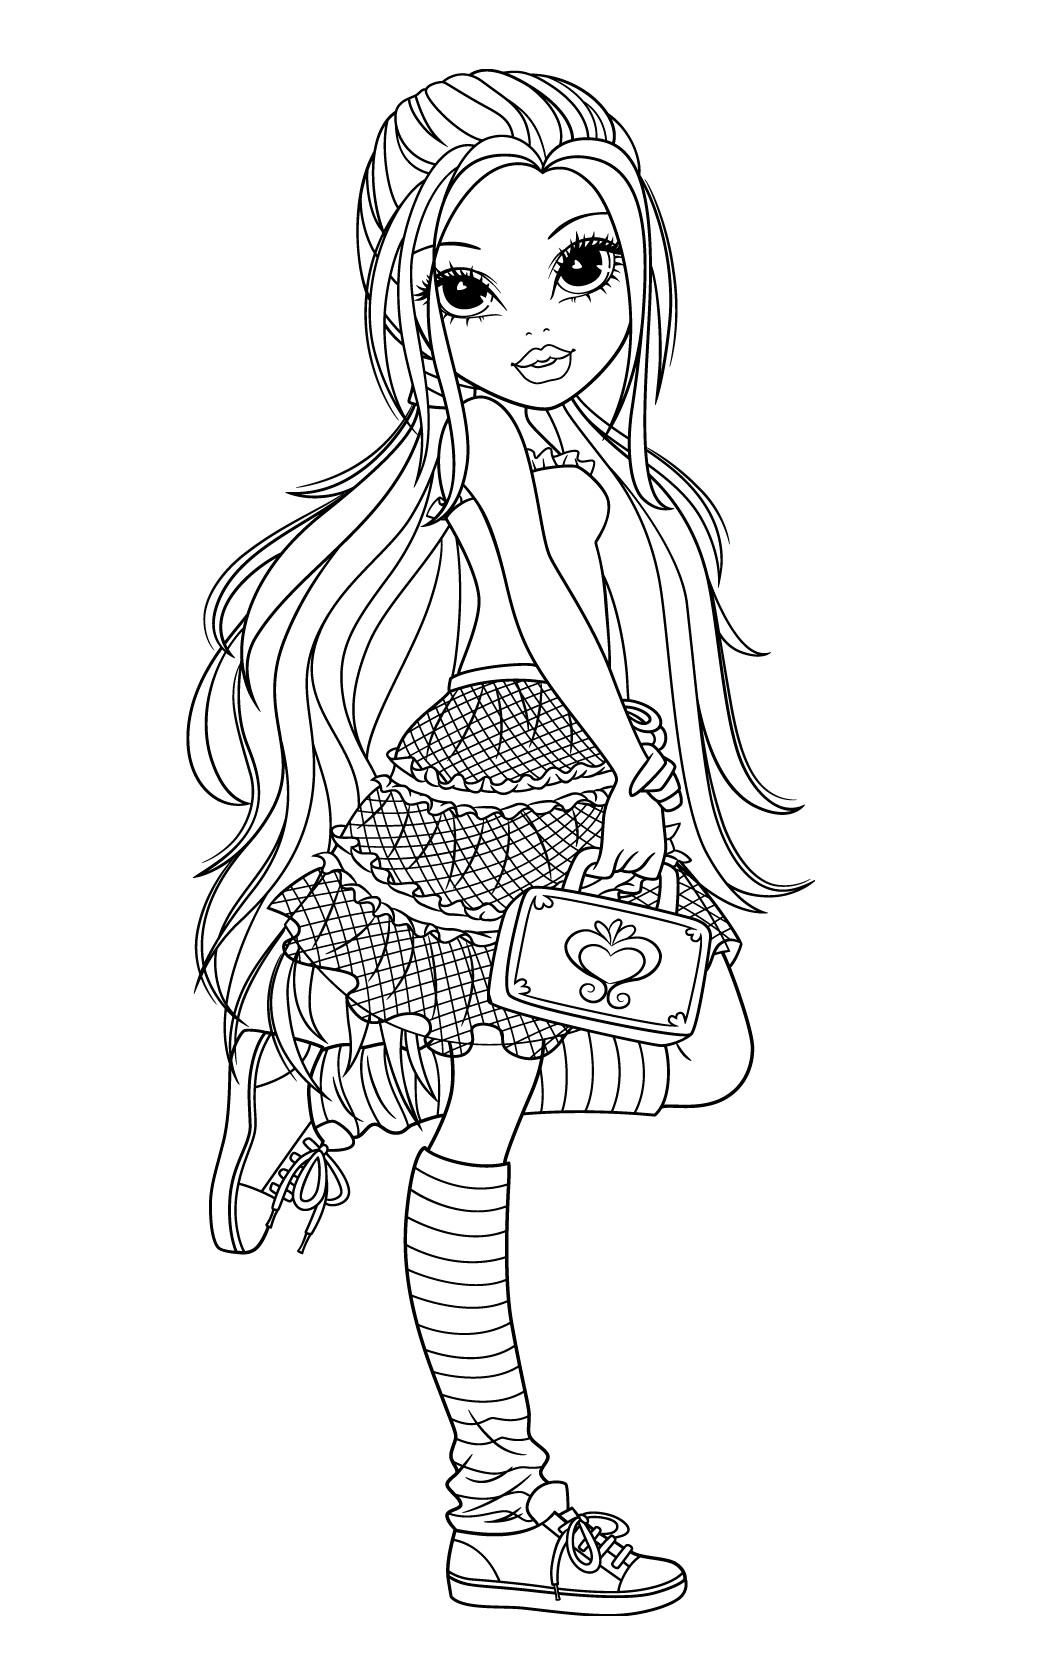 Girl Printable Coloring Pages
 New Moxie Girlz Coloring Pages will be added frequently so